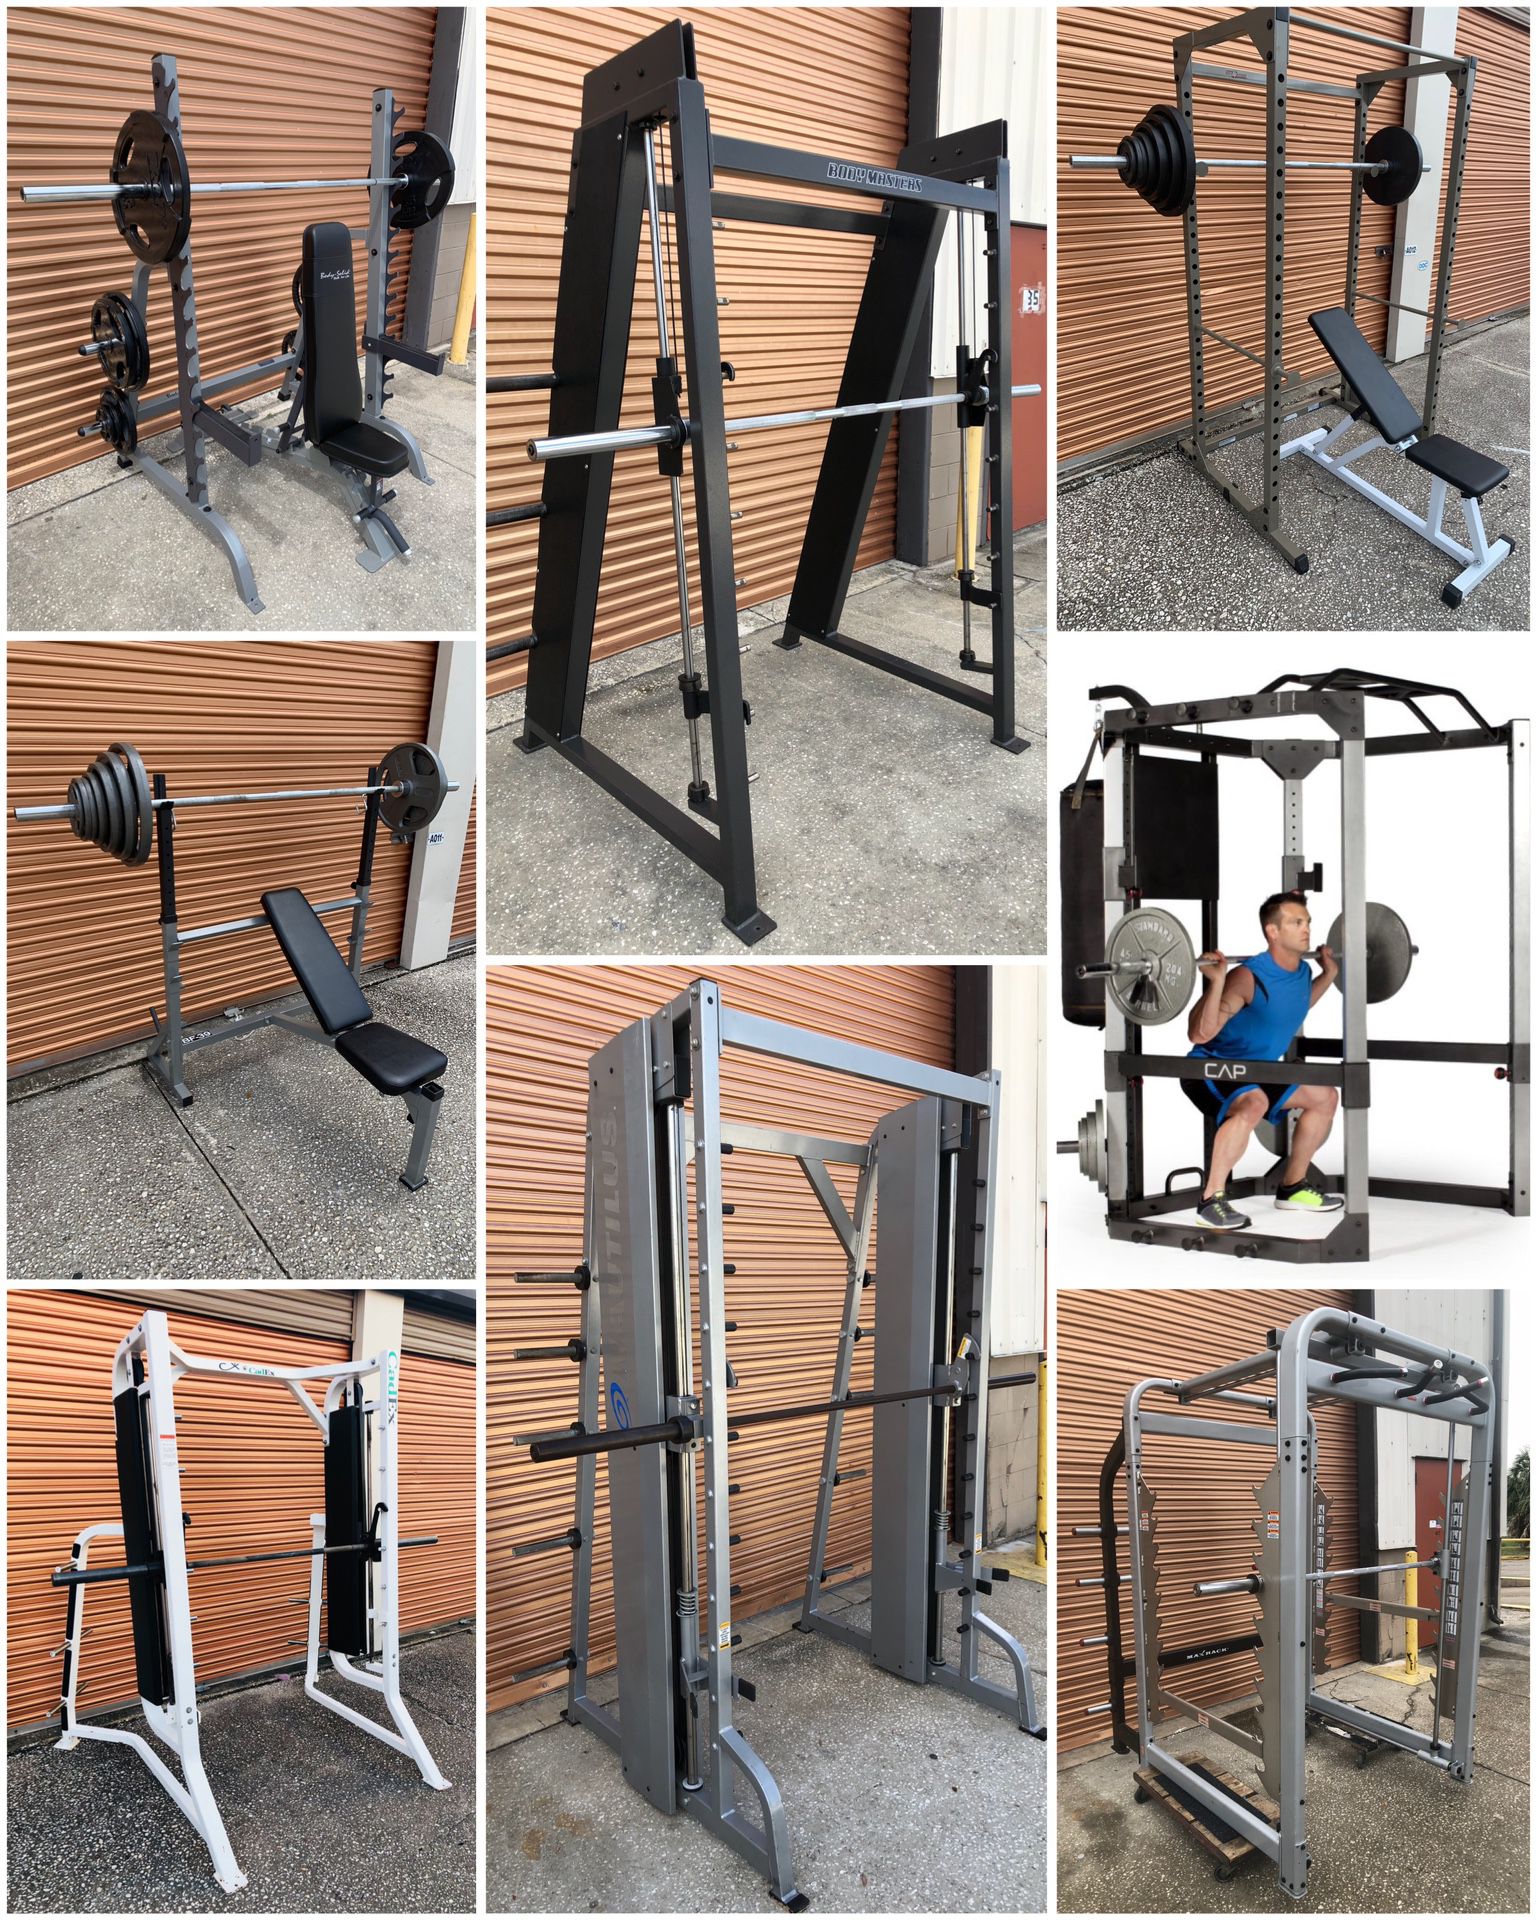 Olympic Weight Benches, Cages, Power / Squat Racks, Dumbbells, Plates, Leg Press